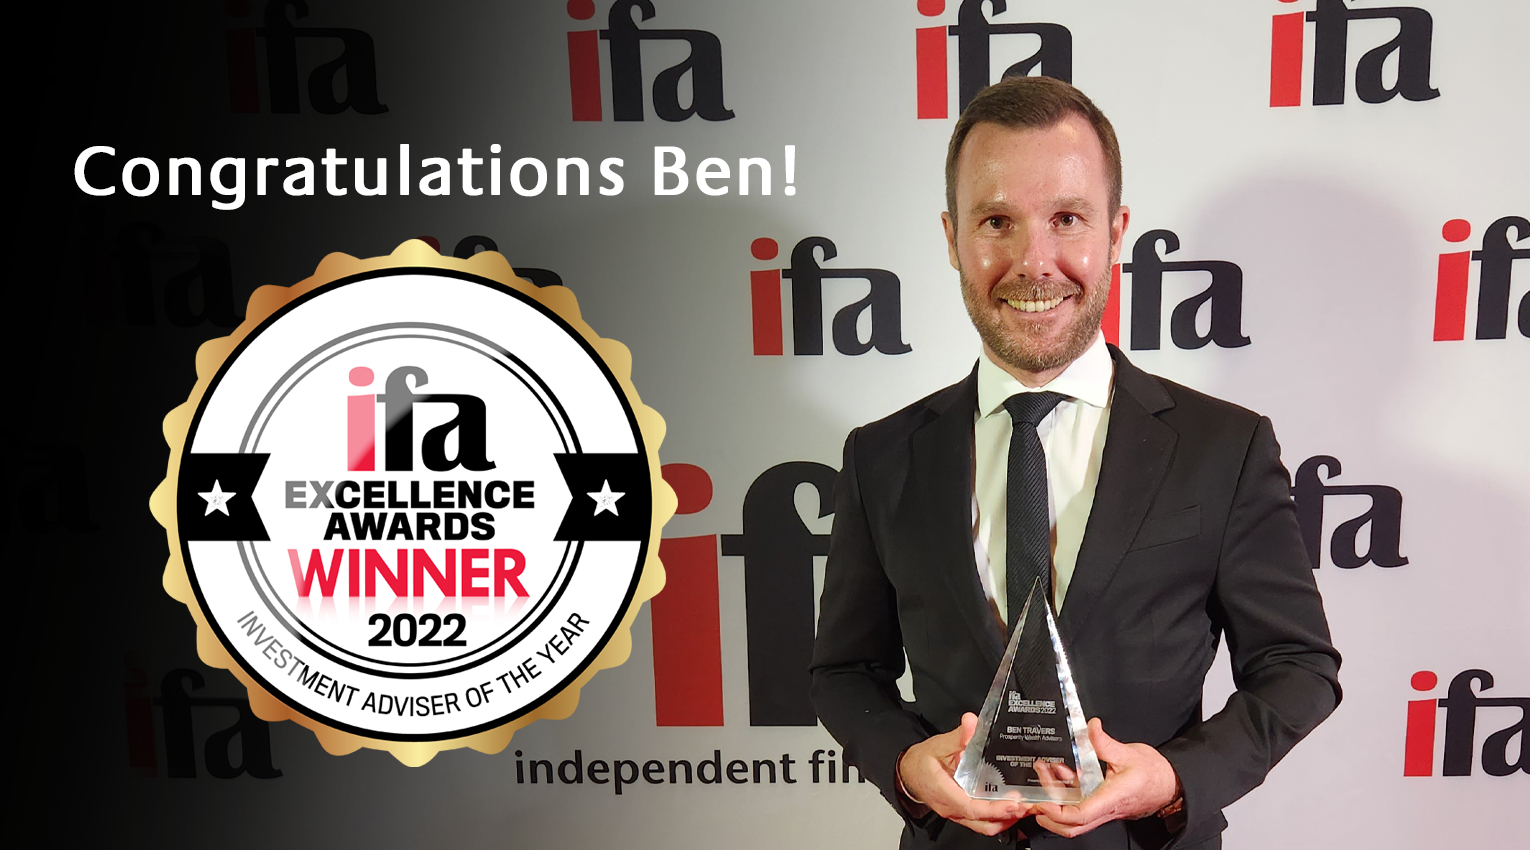 Ben Travers wins ifa Investment Adviser of the Year 